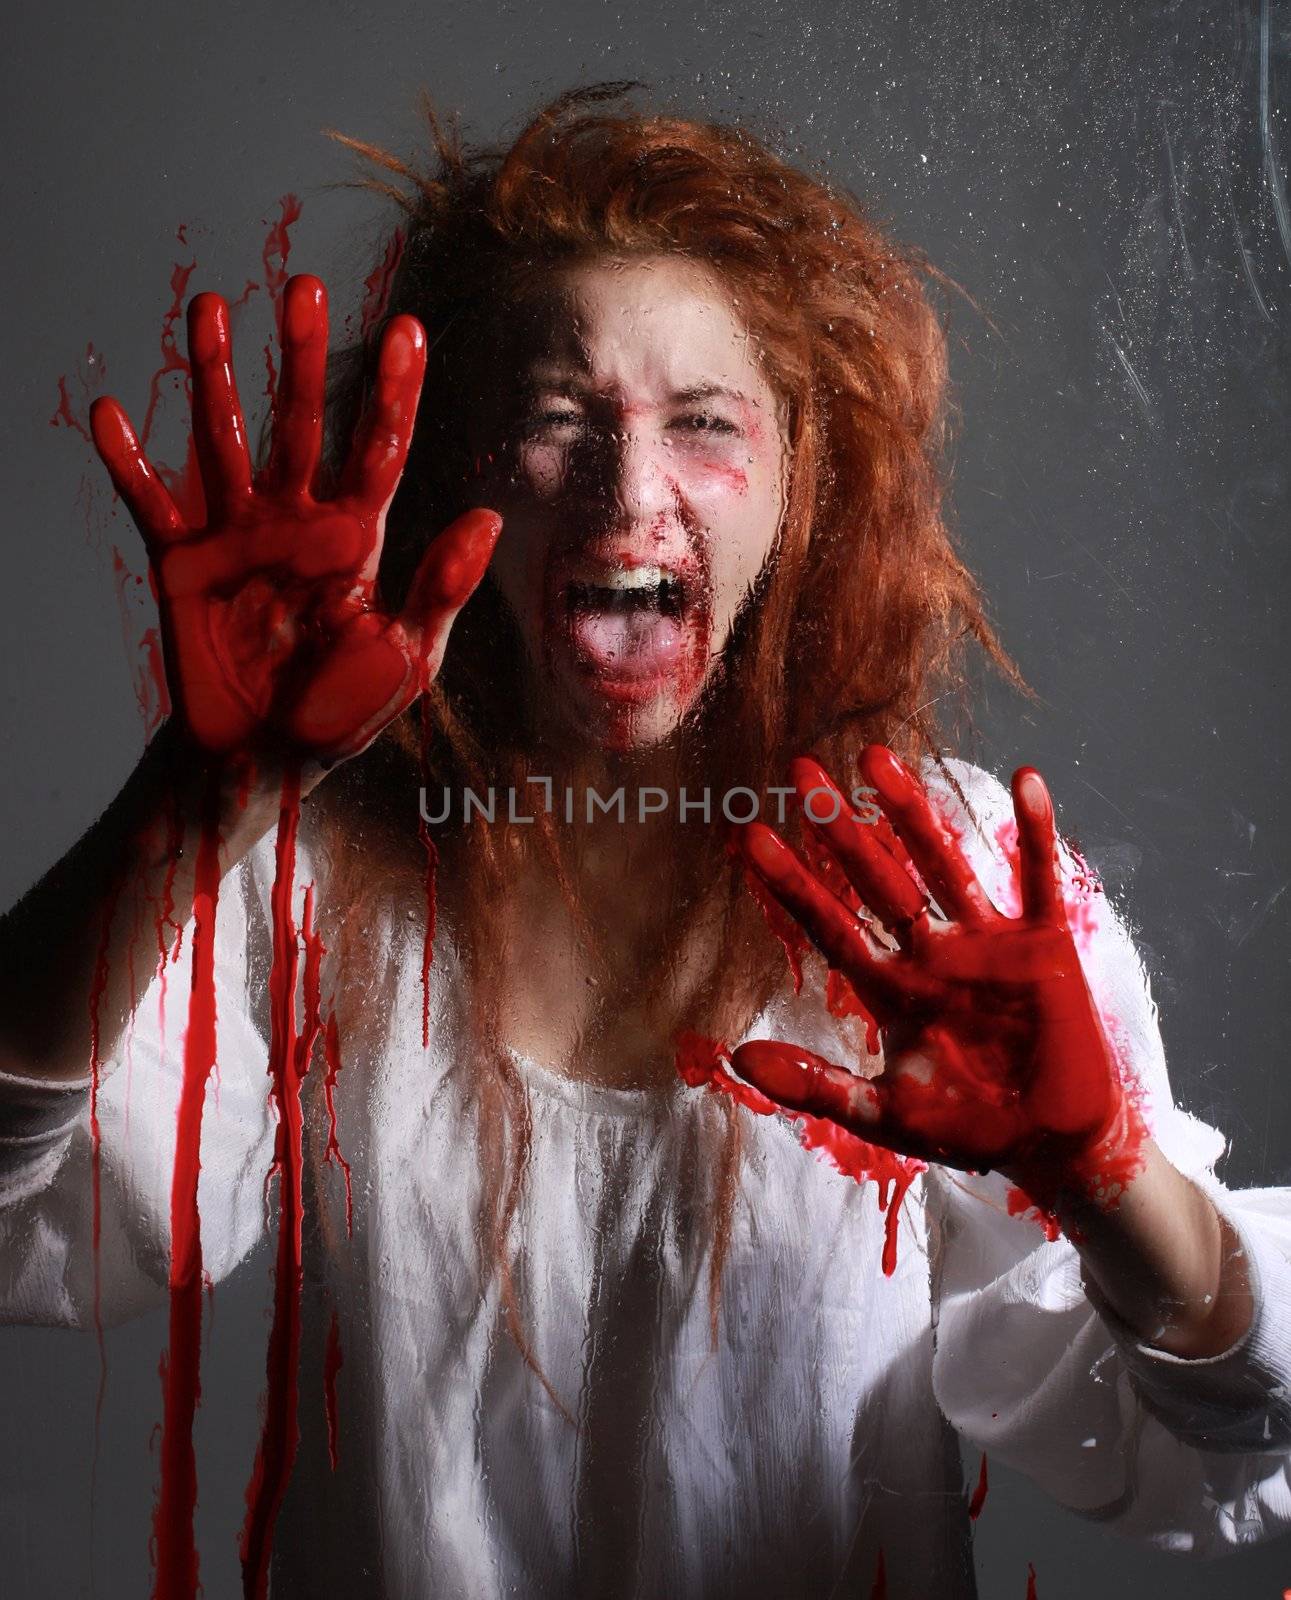 Woman in Horror Situation With Bloody Face